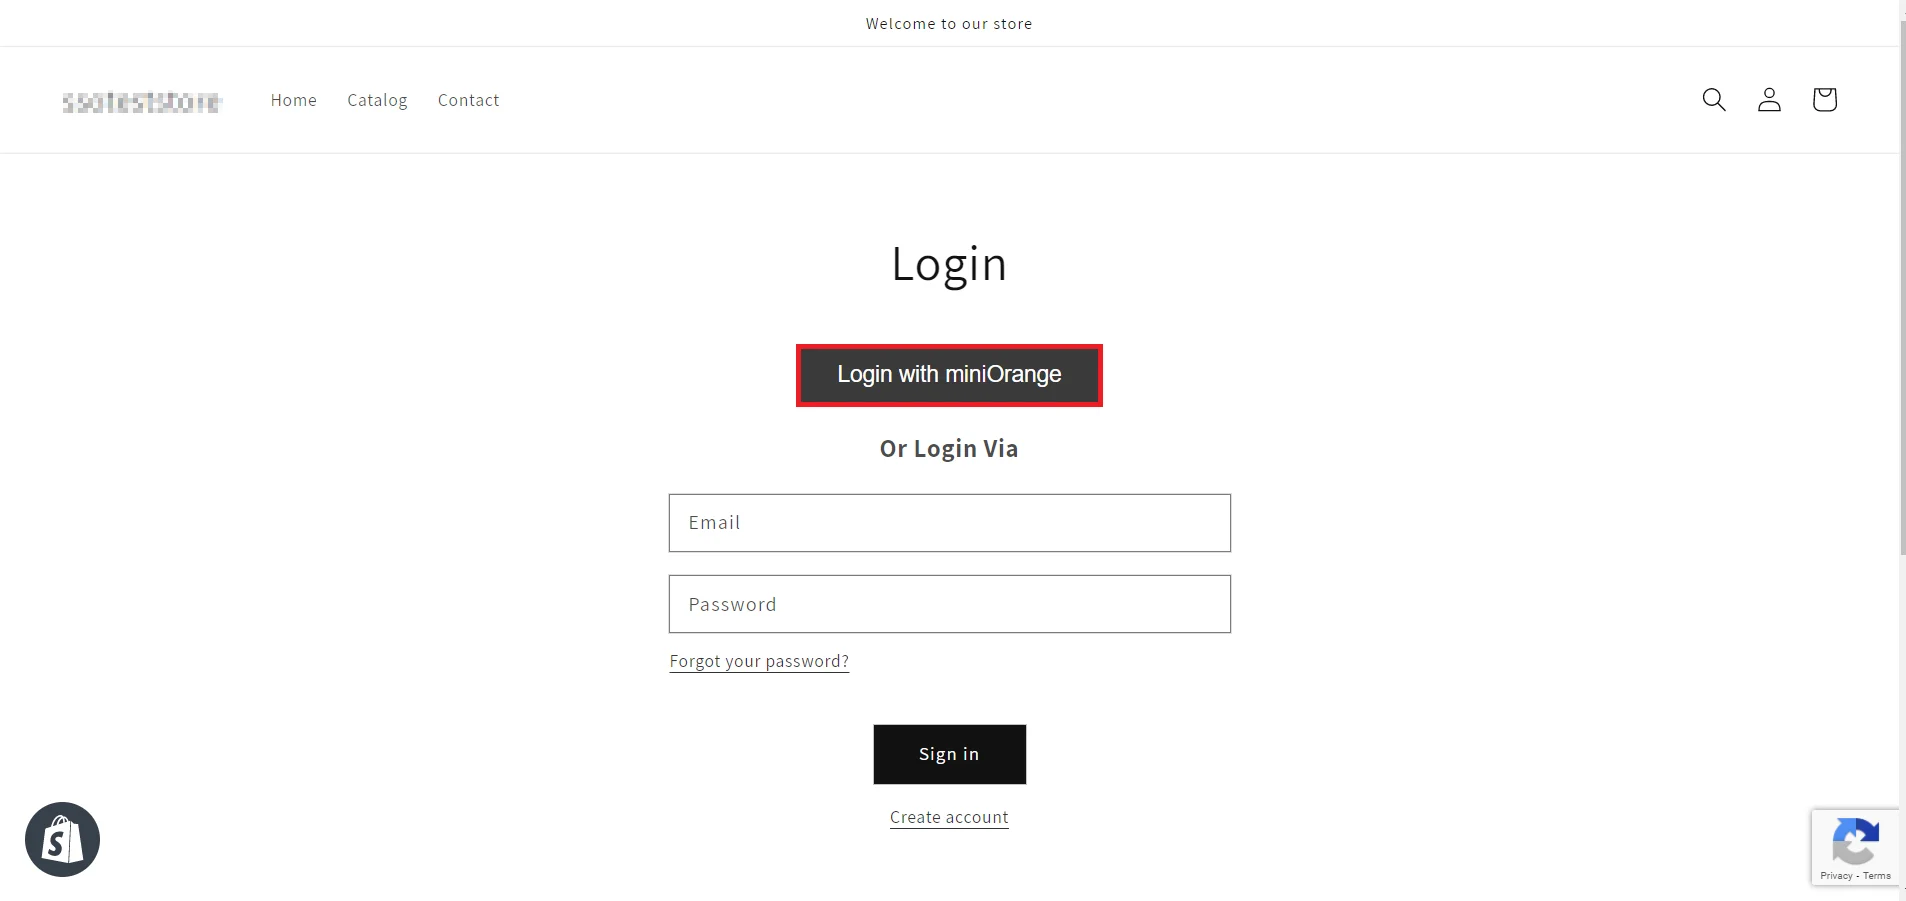 Workday Shopify SSO - Sigle Sign on into SHopify using Workday as IDP - Login button